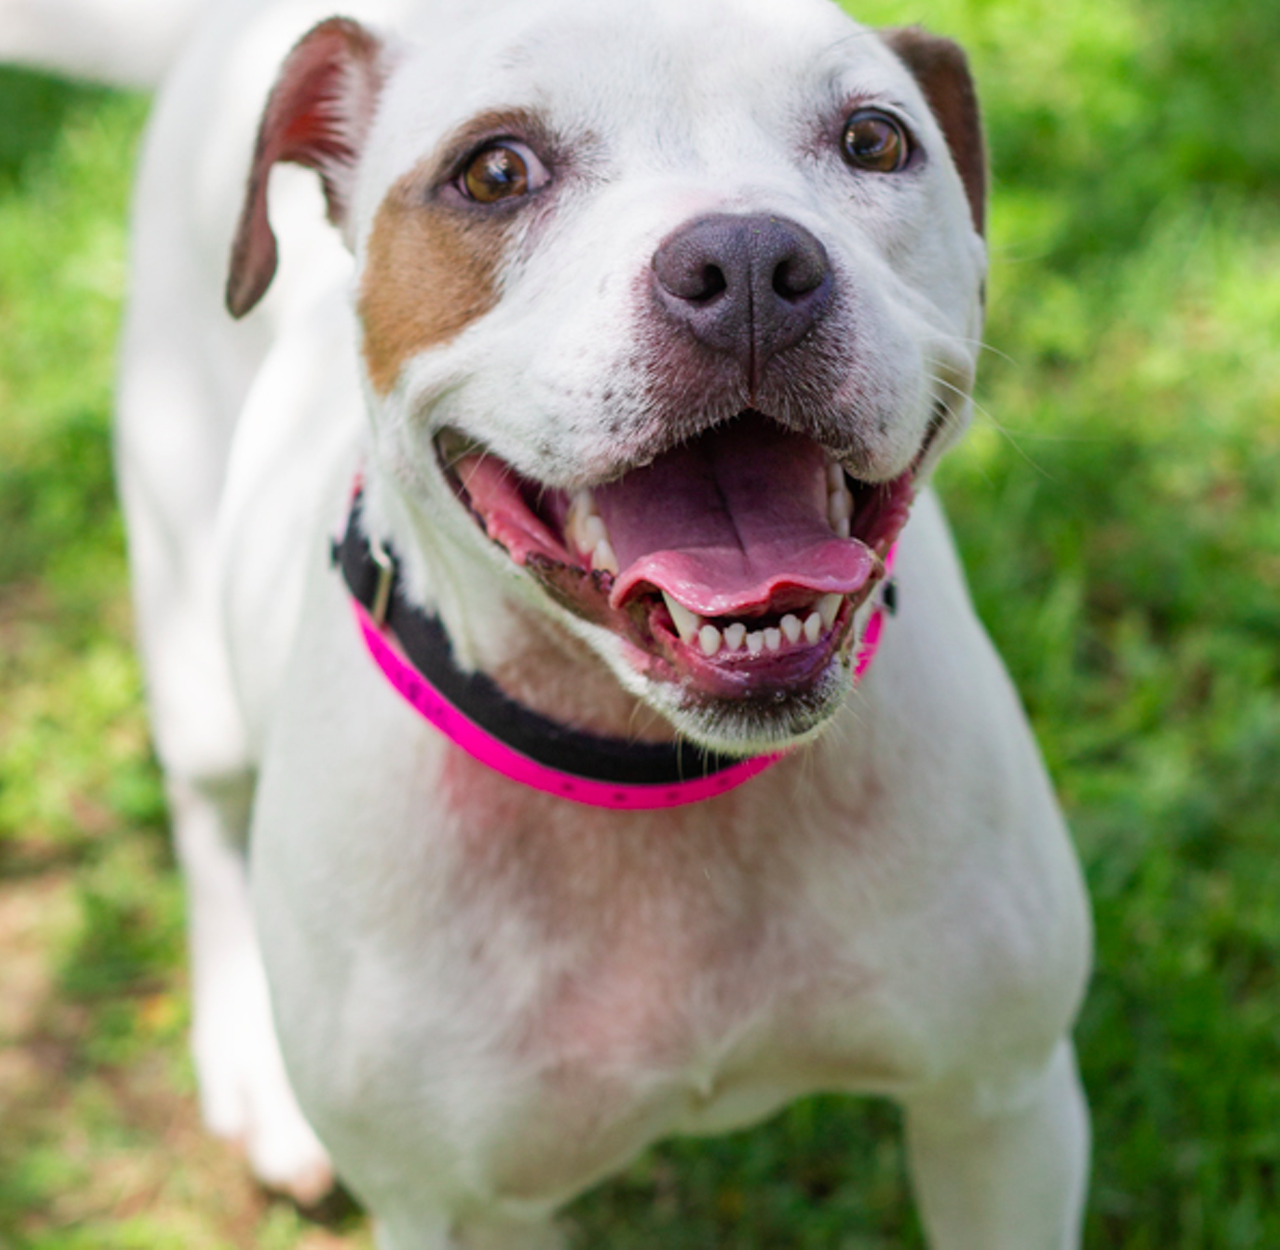 Lyric
"I’m Lyric, that’s right the one and only Lyric. I am such a spontaneous gal that enjoys an open area where I can run and jump. You see that smile, that is the smile I will have once I get to meet you because I love to be with humans and become best pals!”